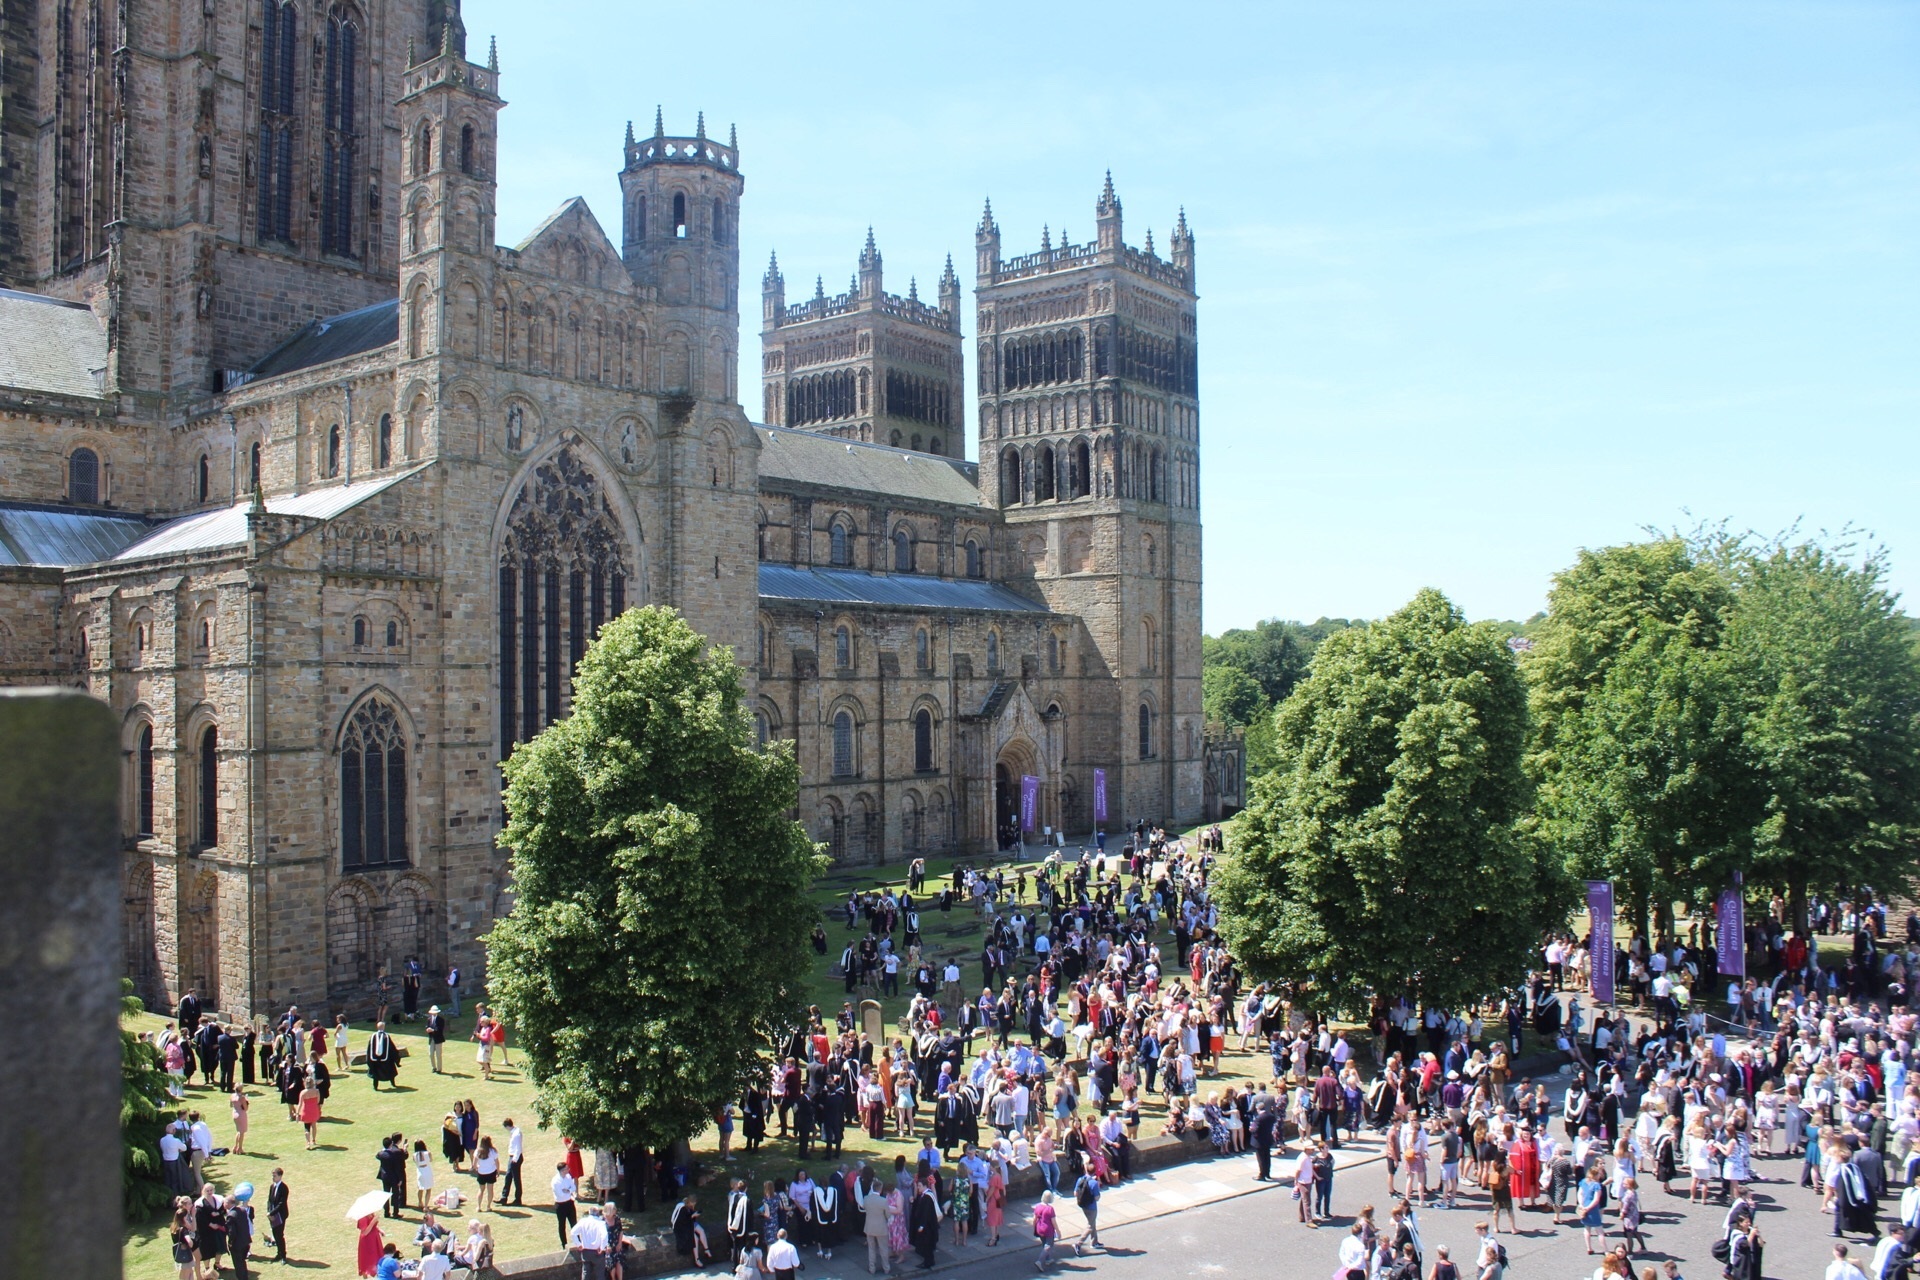 Durham University ranked sixth in complete guide | The Northern Echo